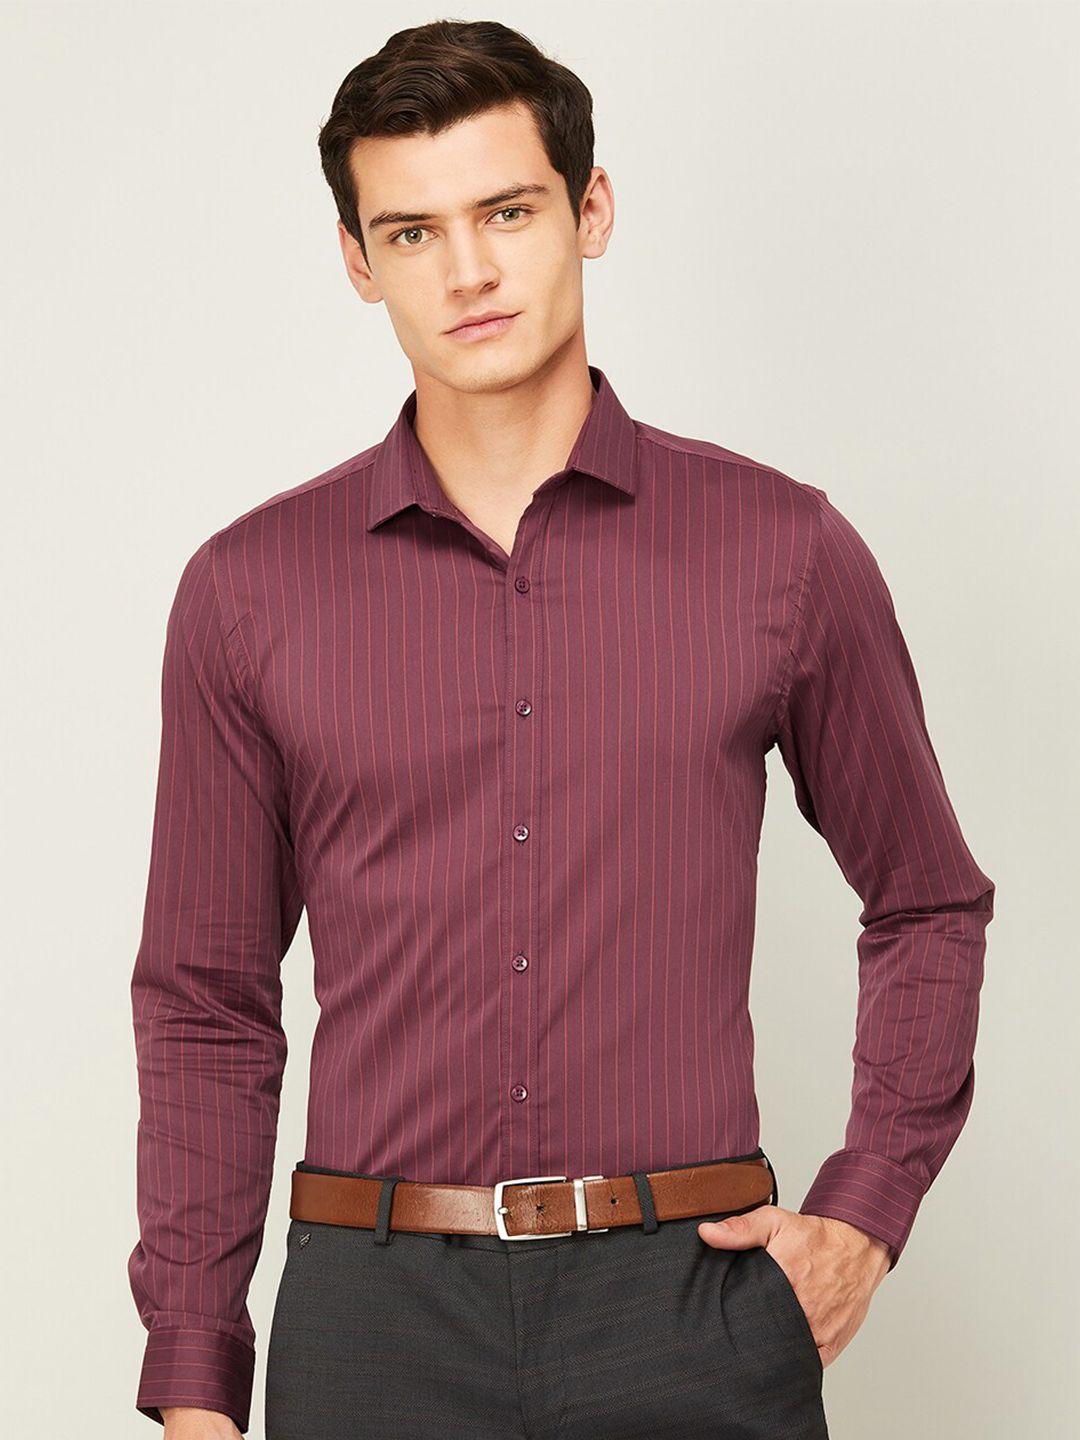 code by lifestyle vertical striped spread collar formal shirt